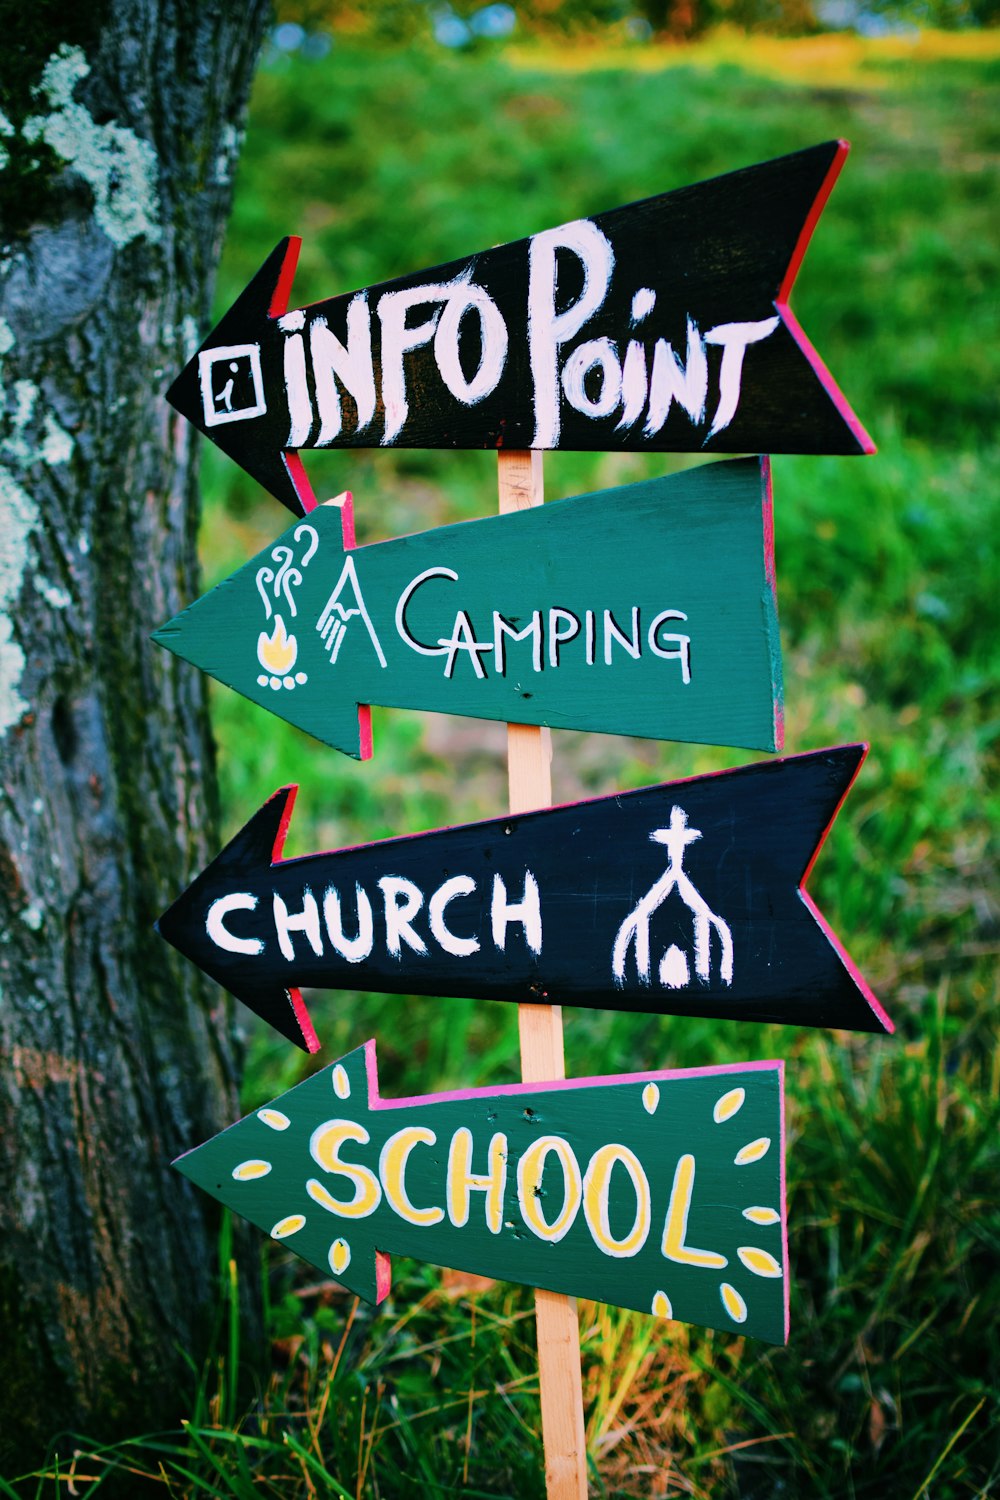 selective focus photography of Info point, camping, church and school signage on the left